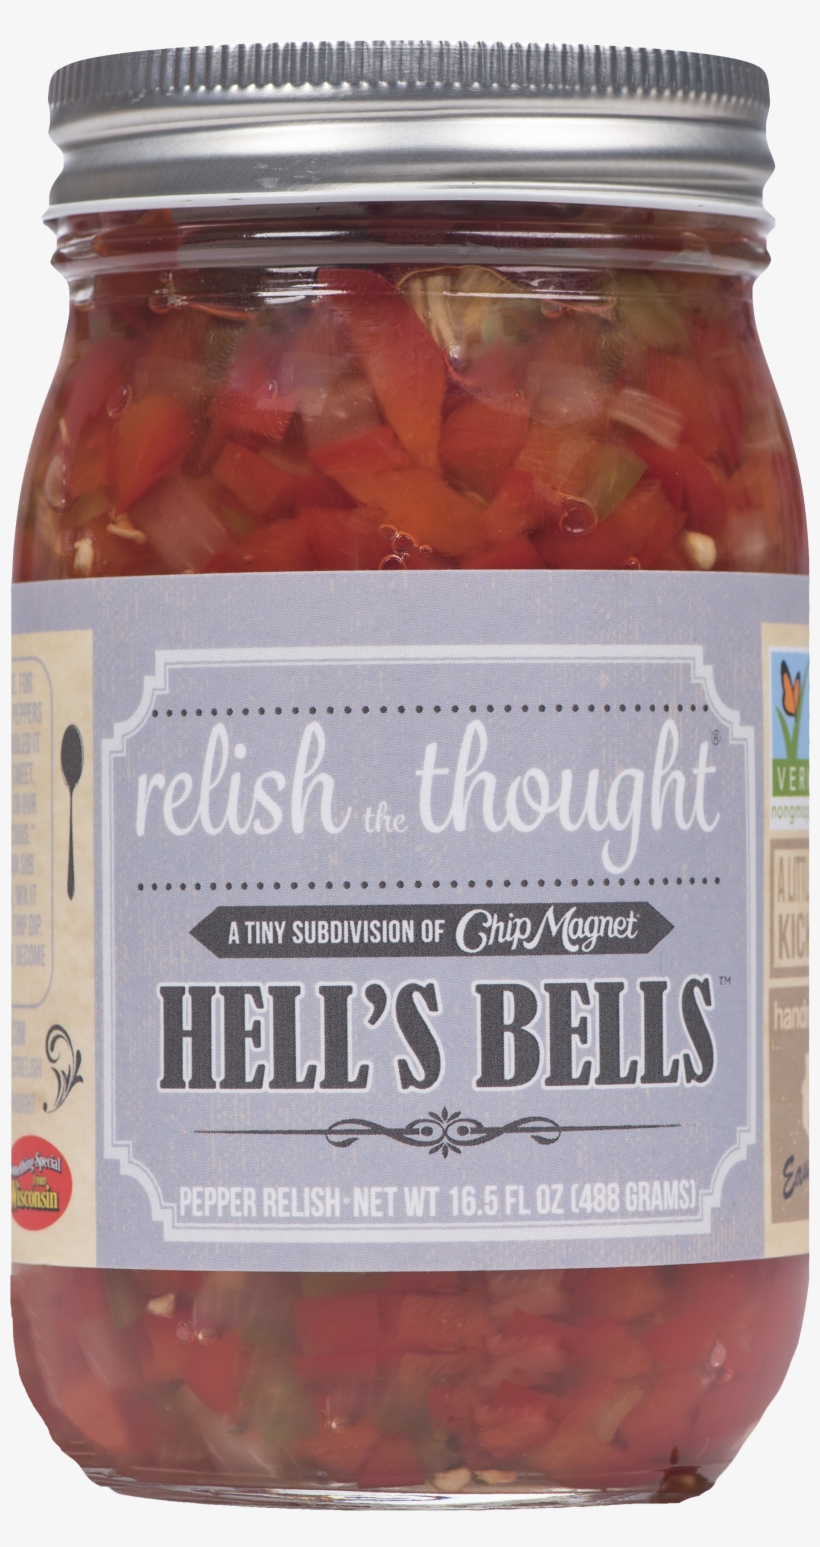 Hells-bells - Stewed Tomatoes, transparent png #486417